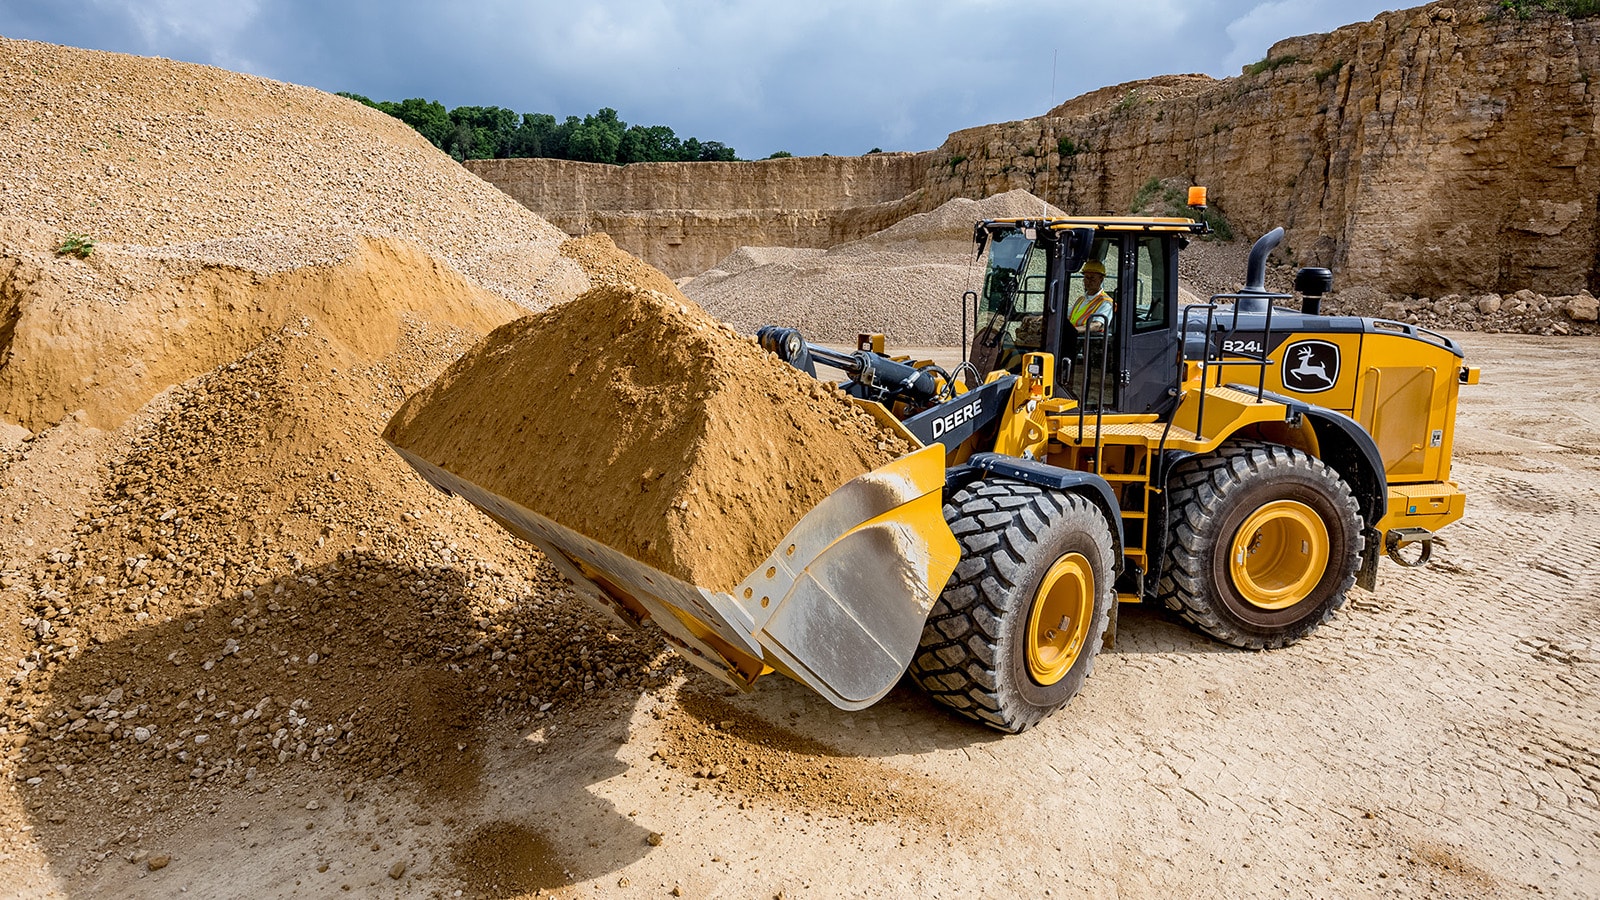 824l wheel loader scooping material in a quarry